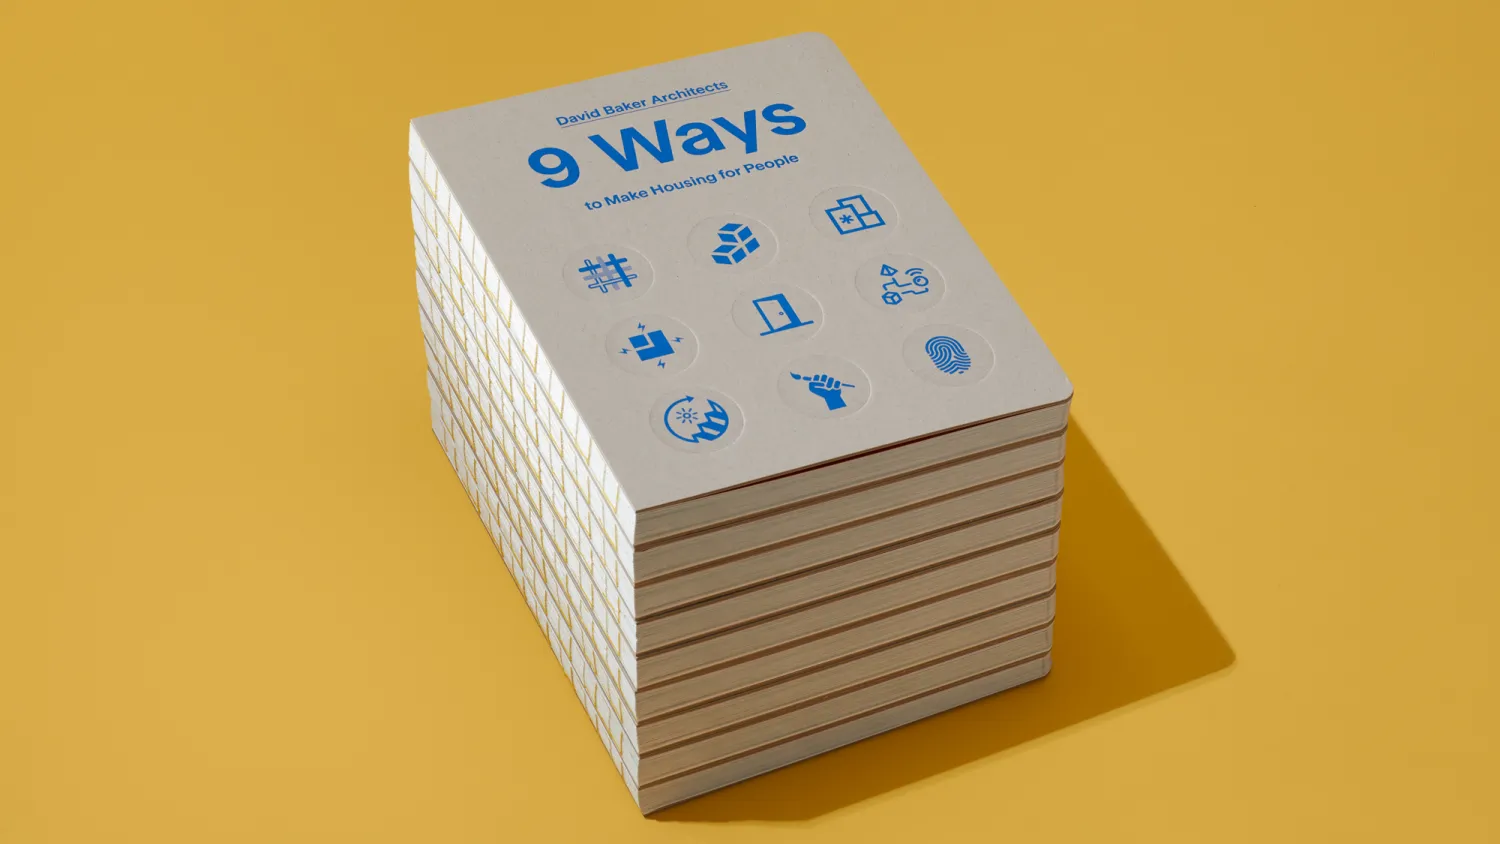 Stack of 9 Ways books on a yellow background